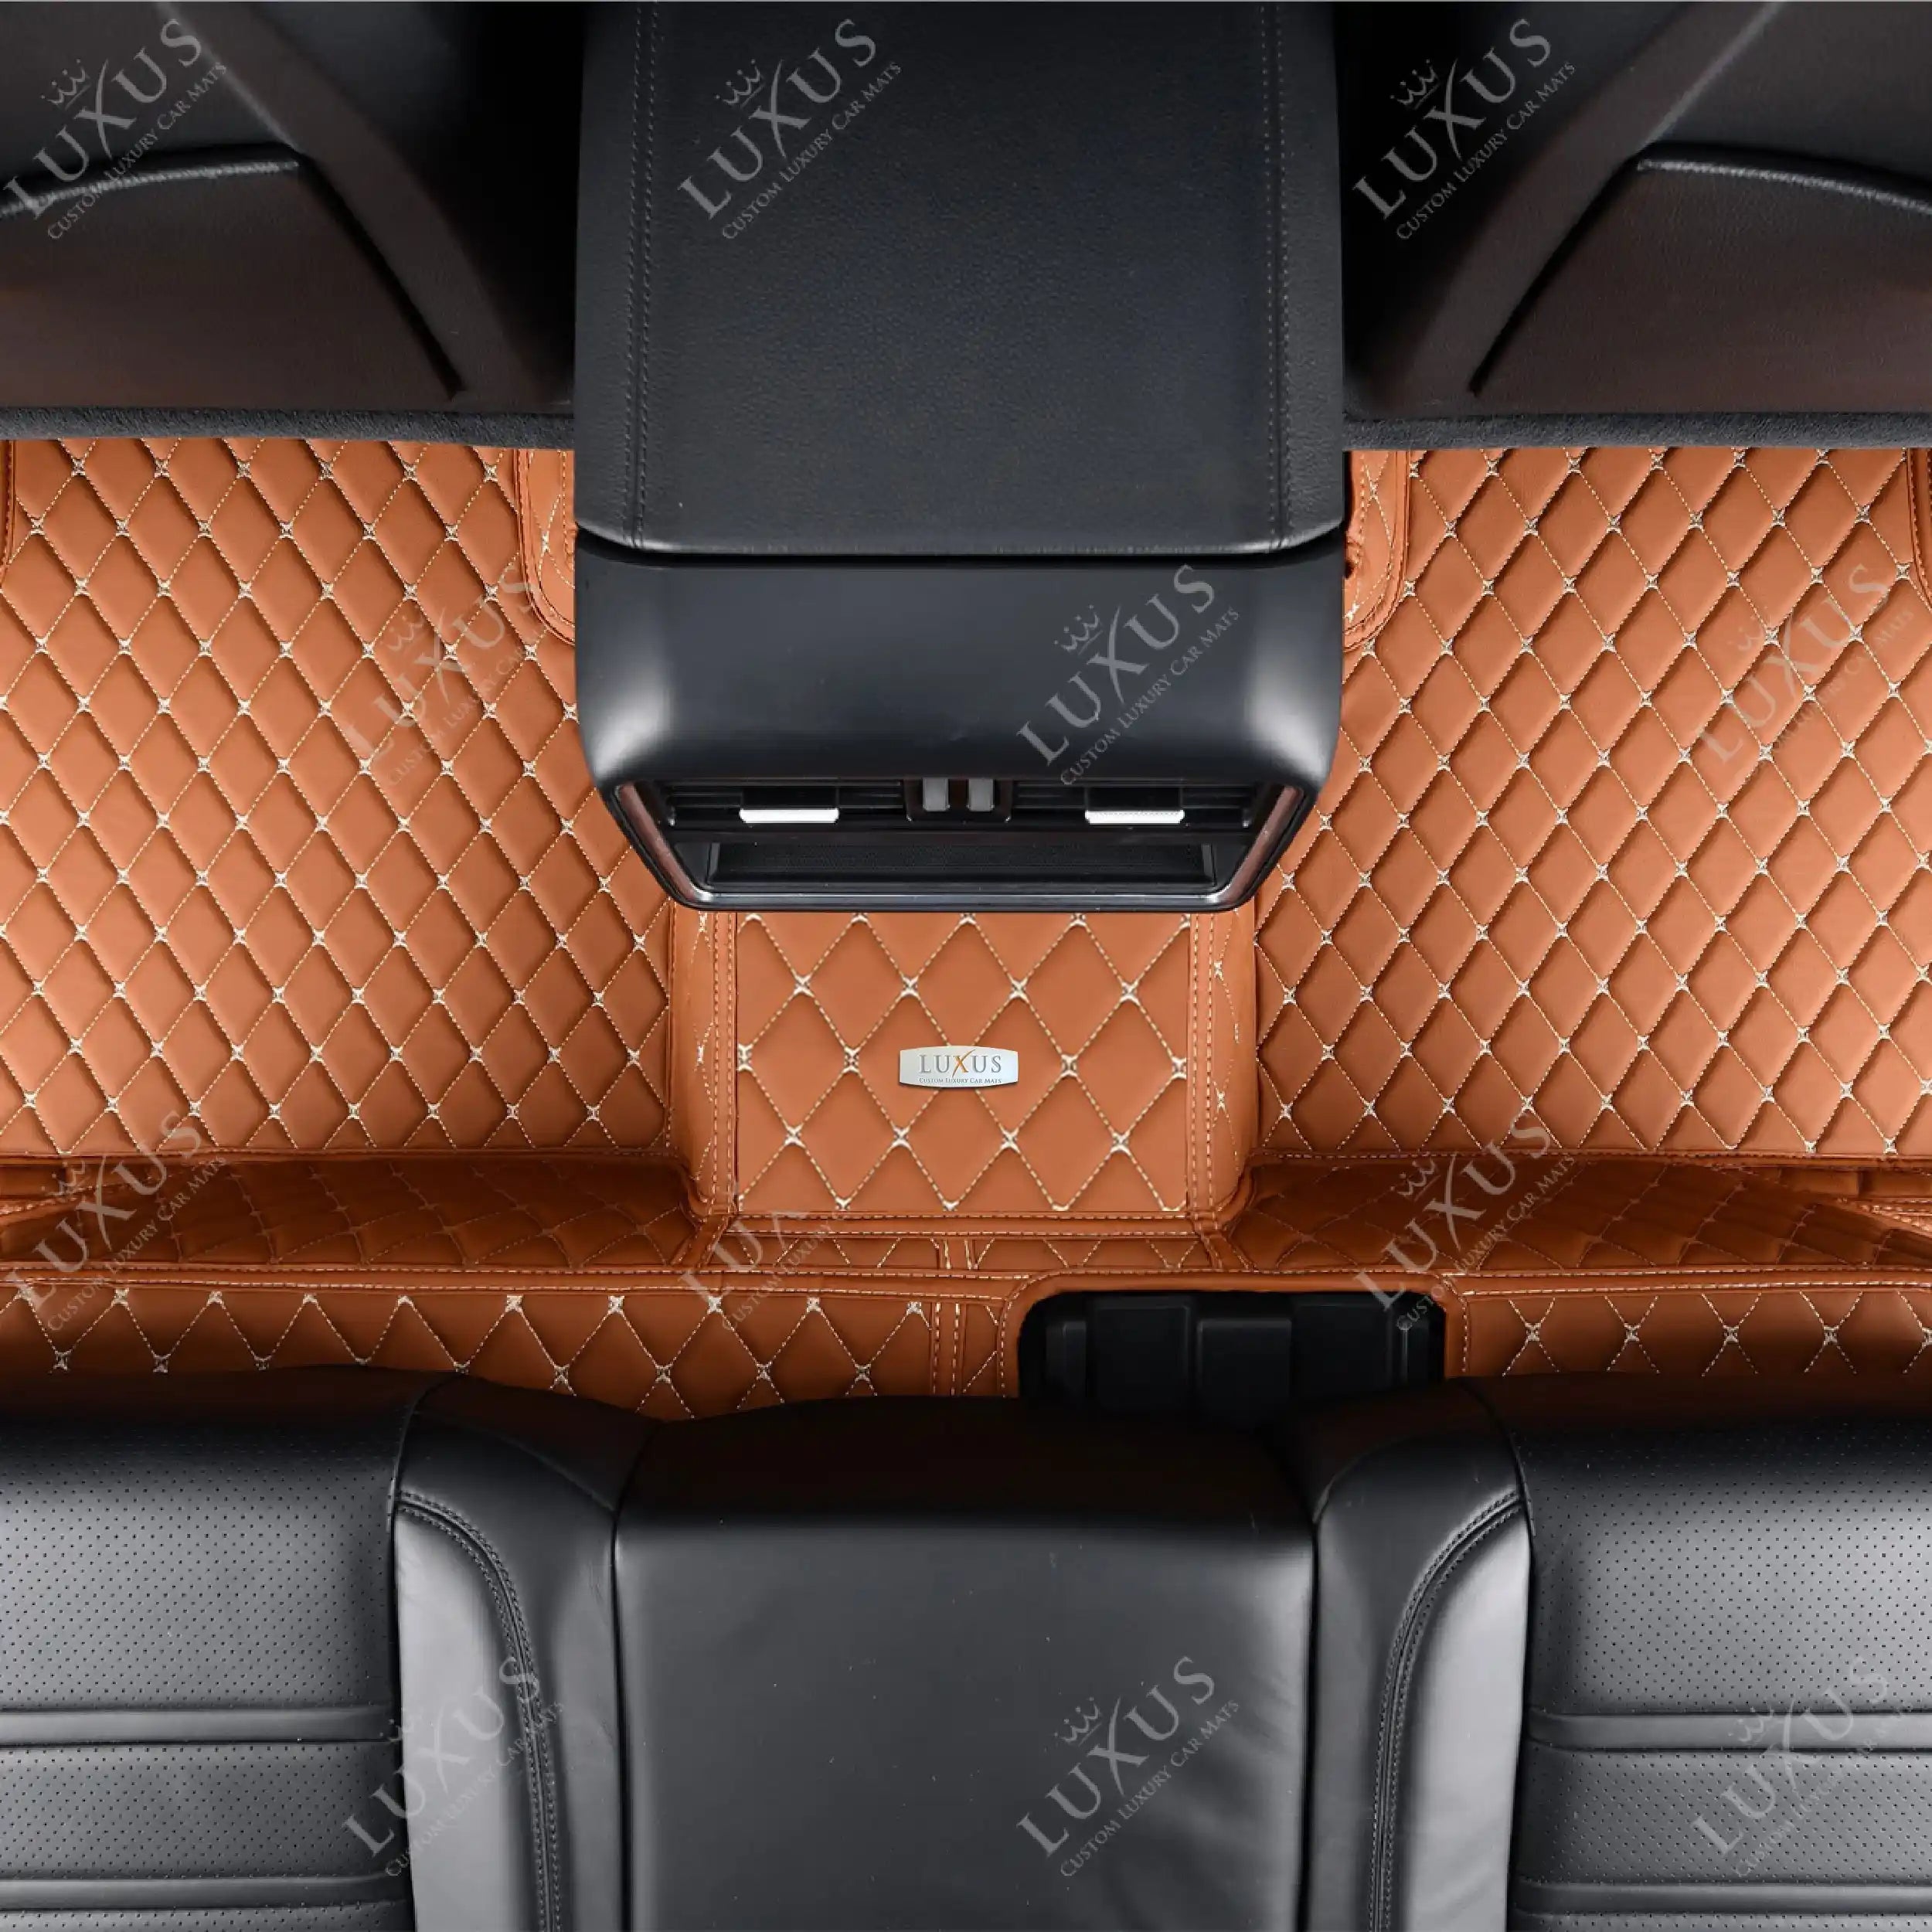 Car, Truck & SUV Floor Mats and Liners